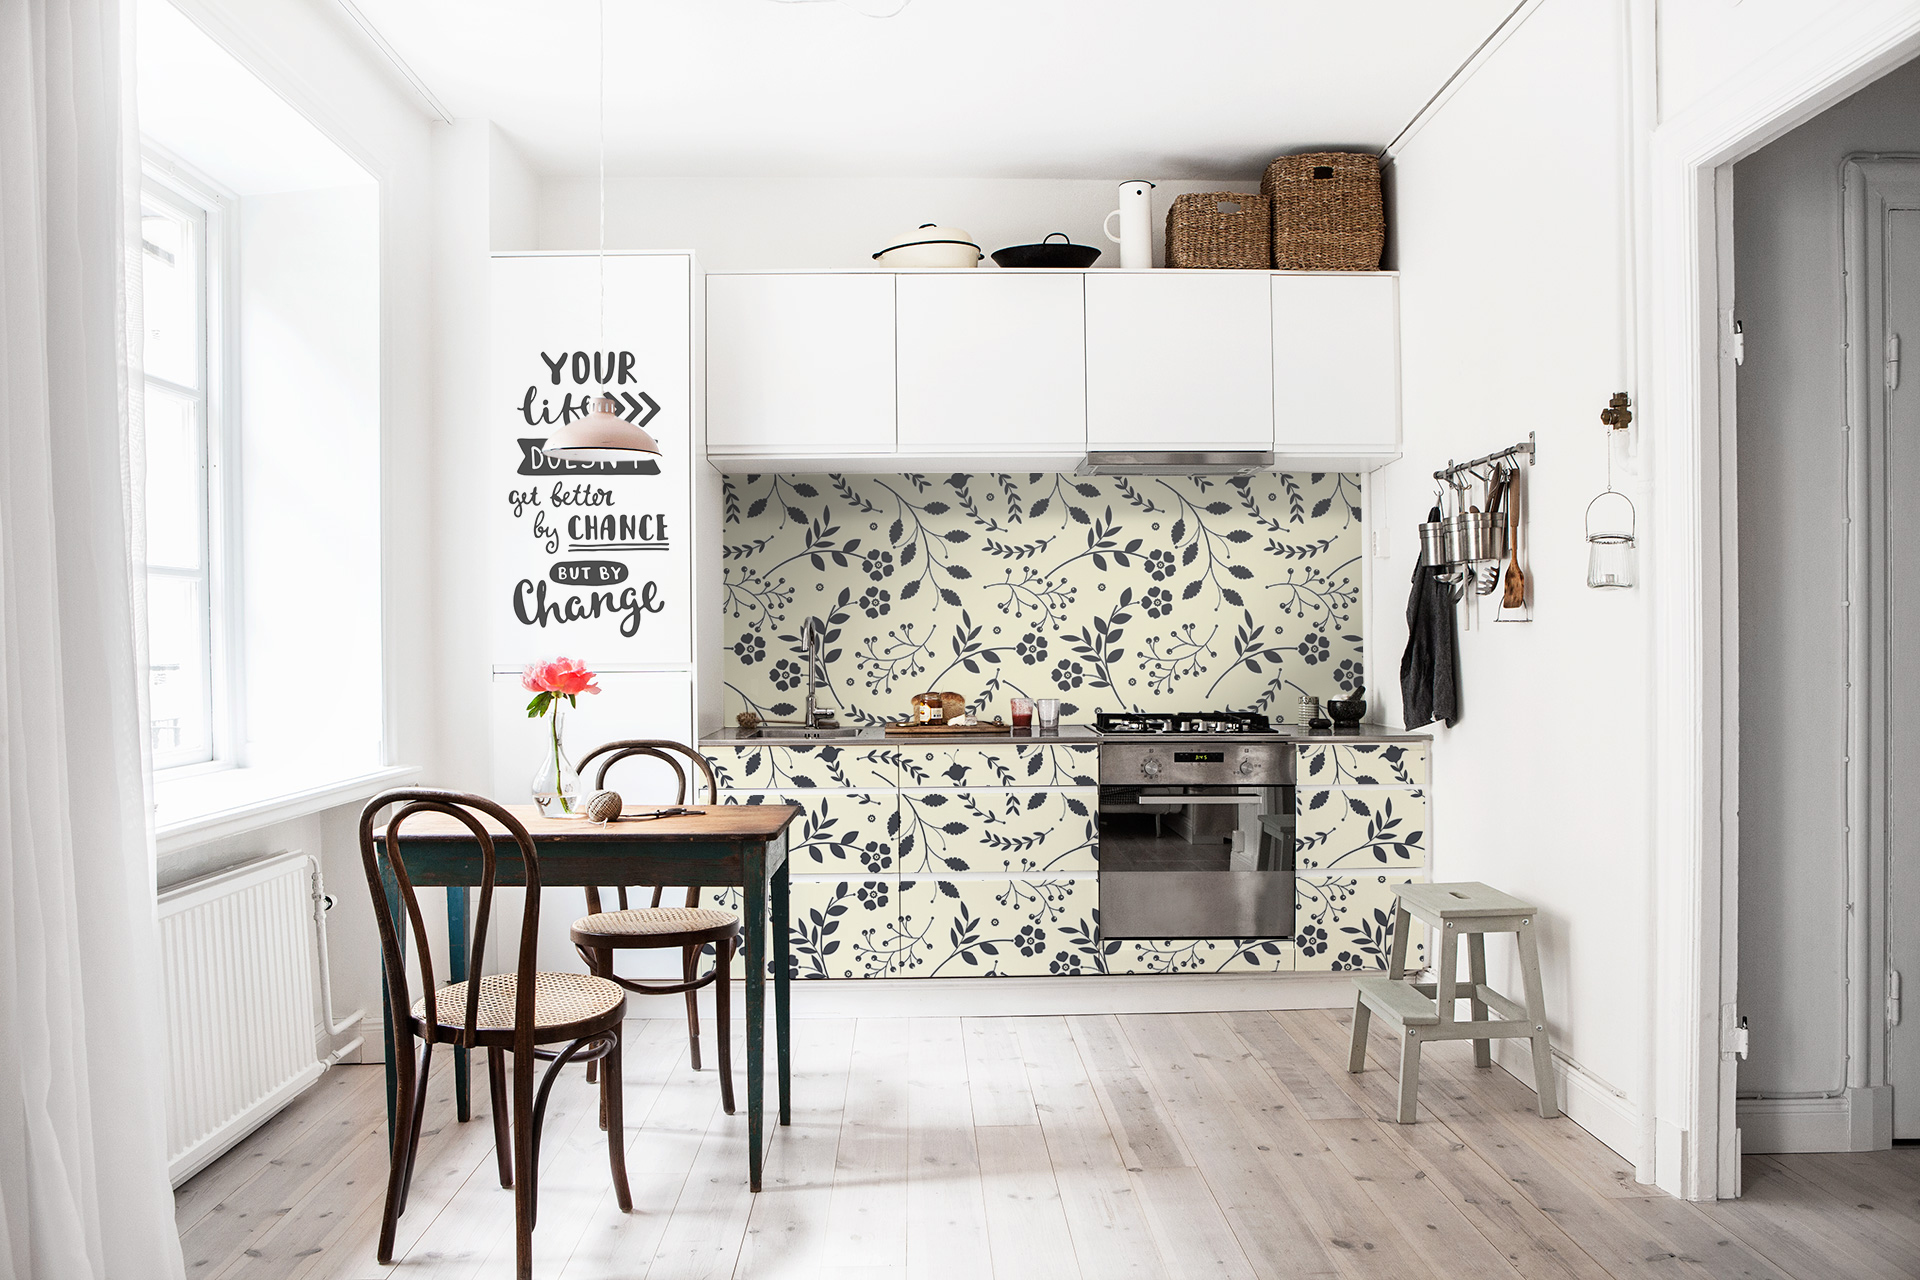 Nature in style • Kitchen - Scandinavian - Art & lifestyle - Flowers and plants - Stickers